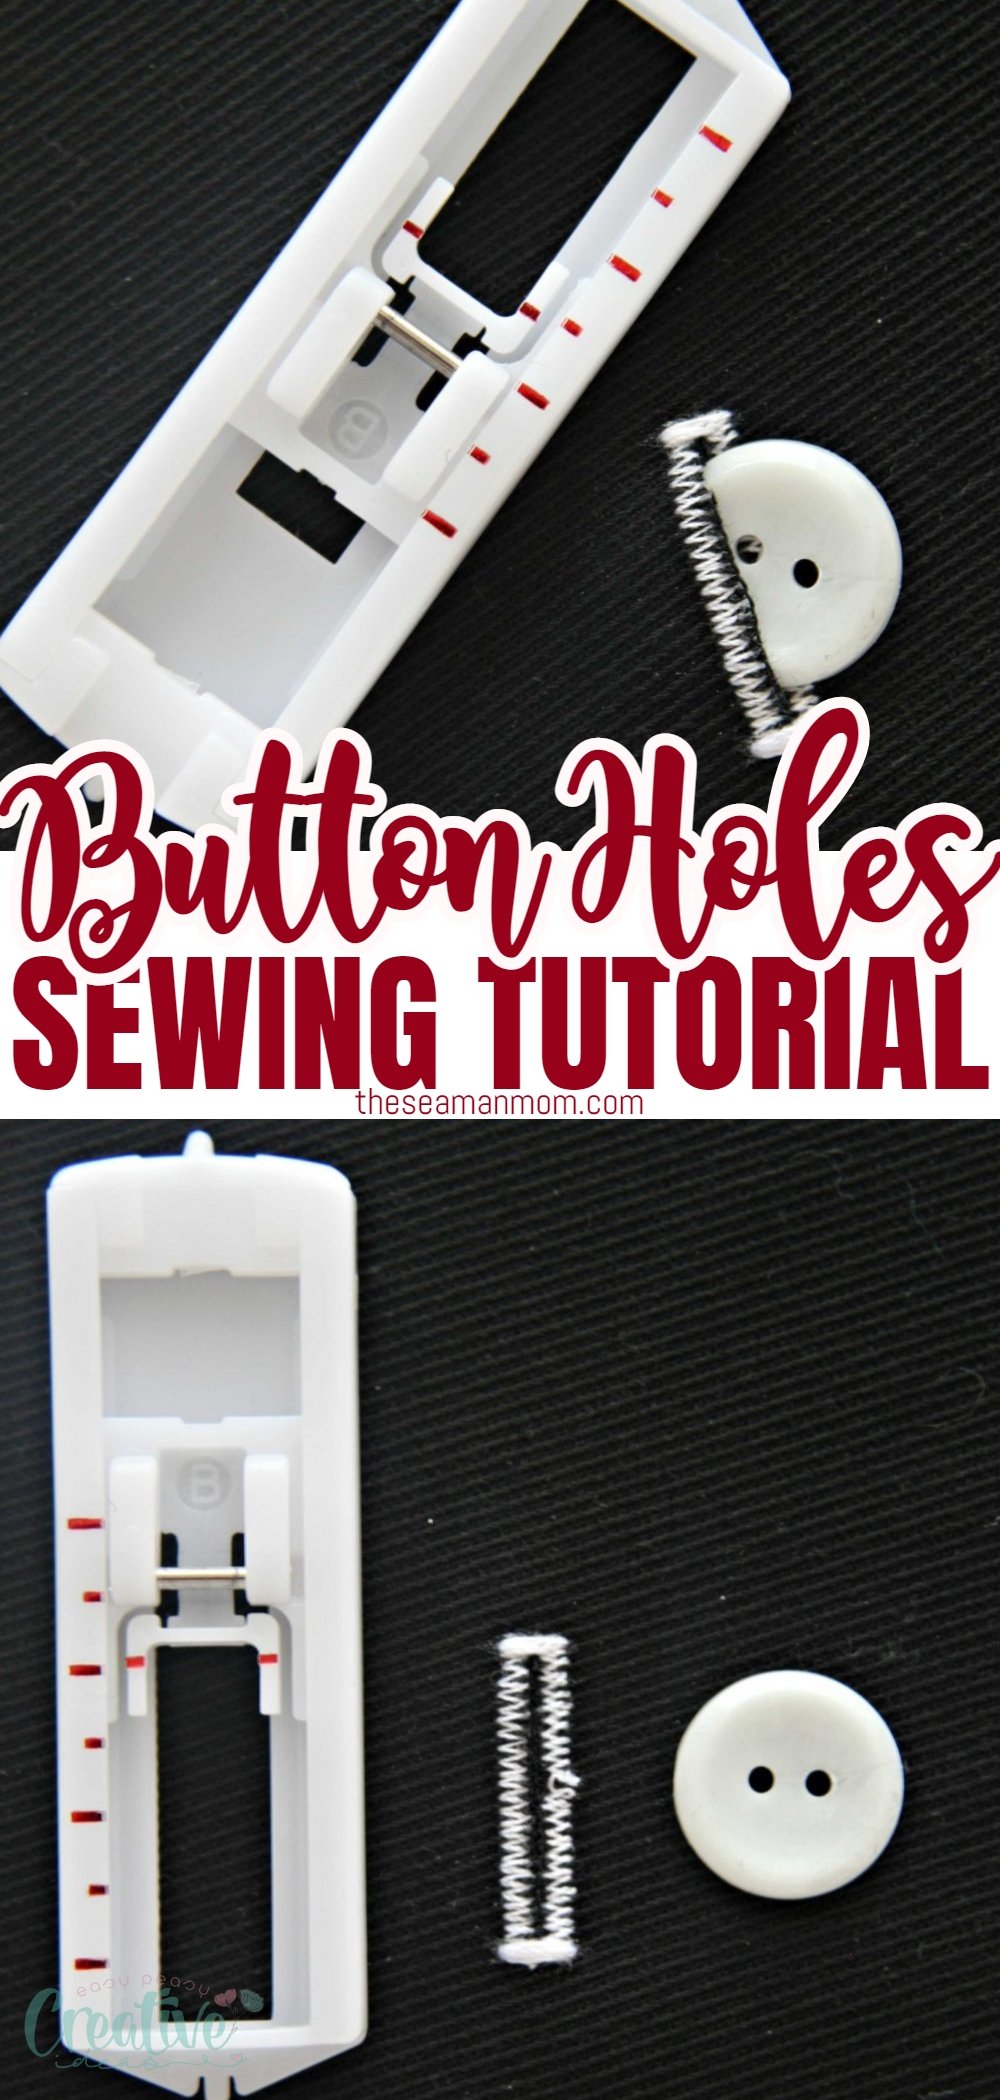 Sewing buttonholes may seem like a daunting task, but with my easy-to-follow tutorial, you'll be sewing perfect buttonholes in no time! In fact, it's so easy peasy when you get to use a singer buttonhole foot as I did. Here's a simple and quick tutorial on how to make buttonholes, perfect for sewers of all levels! via @petroneagu